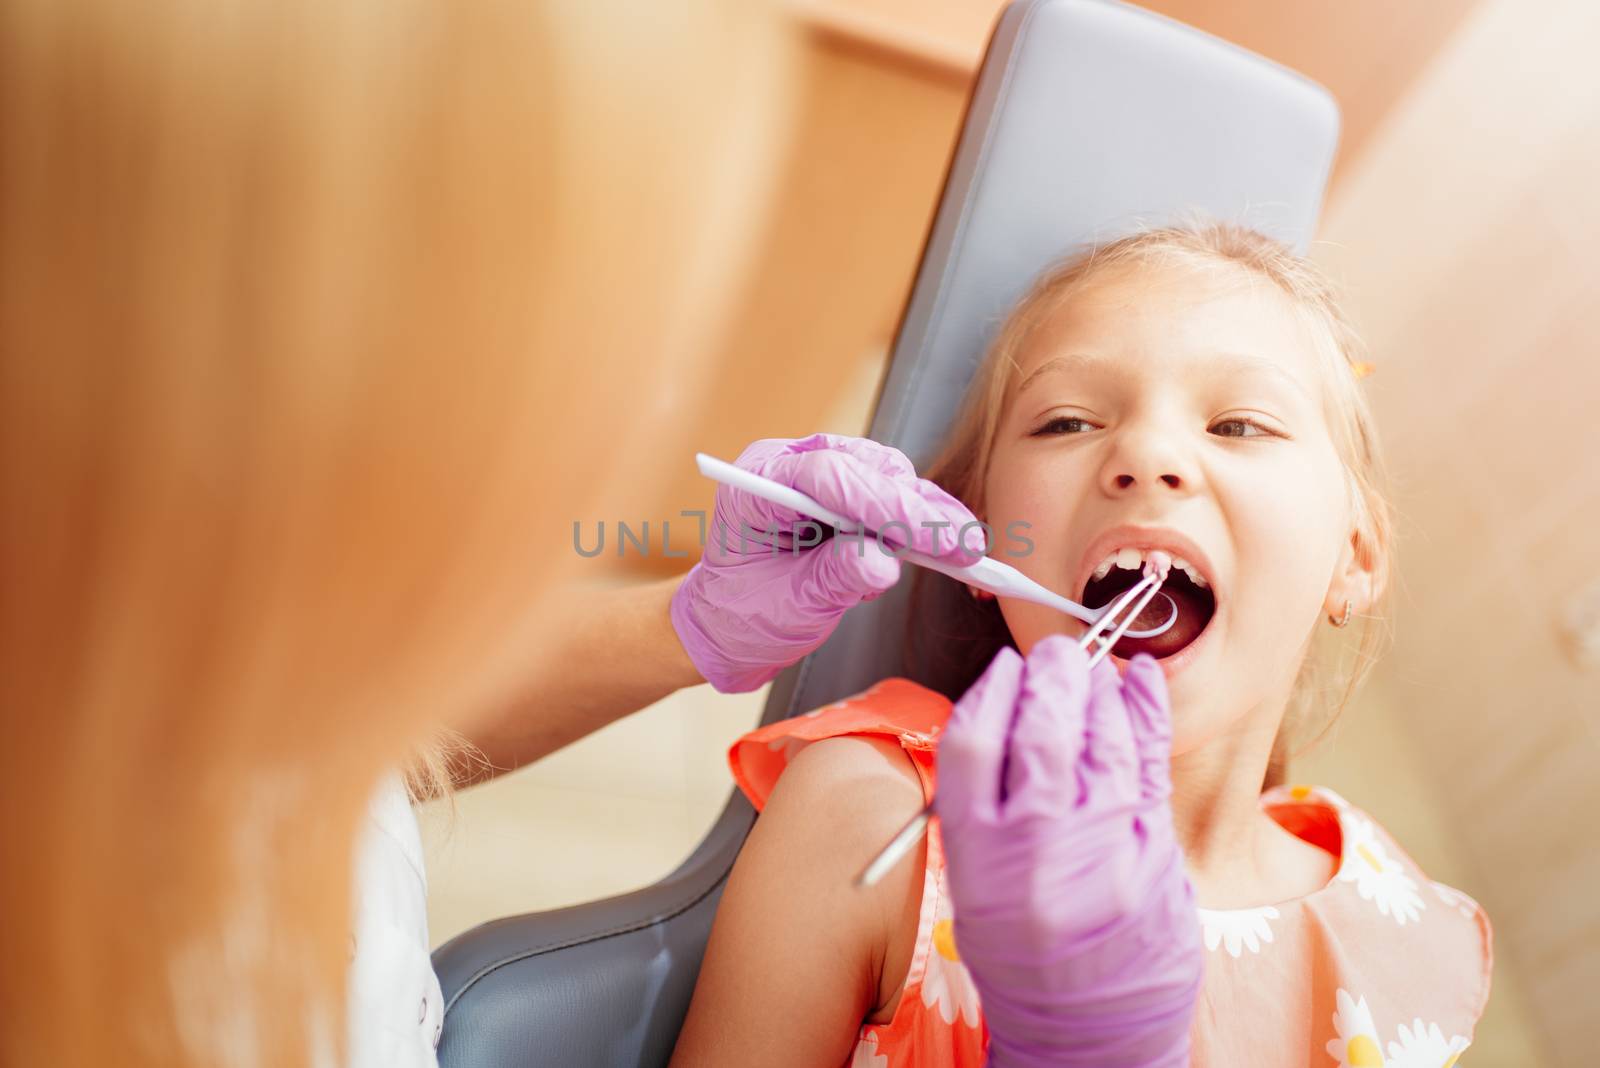 Little Girl At The Dentist by MilanMarkovic78